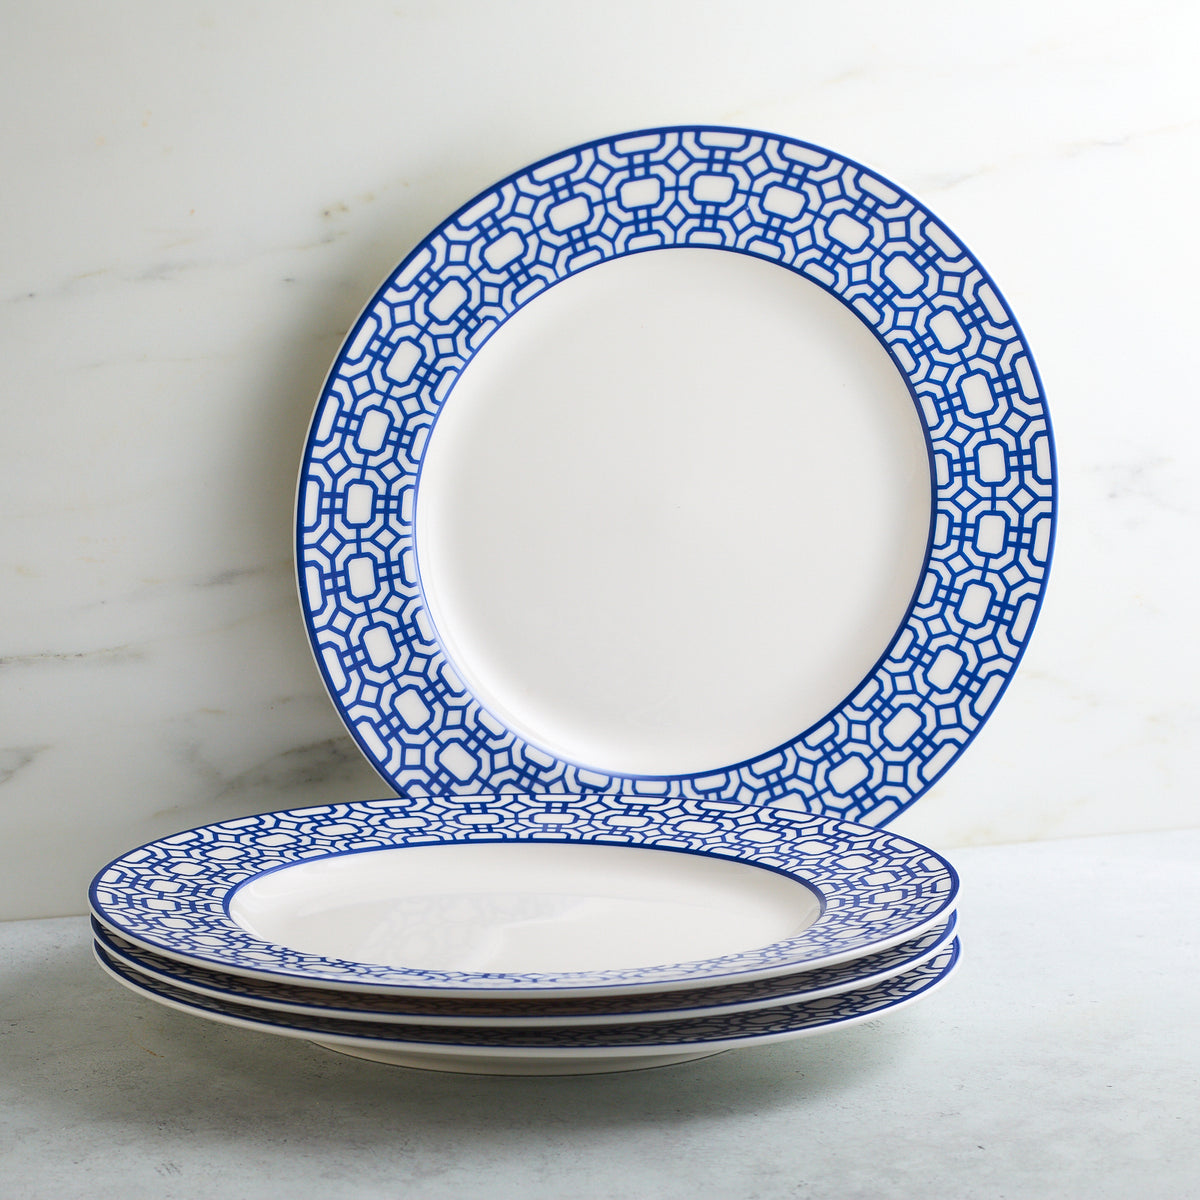 A stack of four white ceramic plates with blue geometric patterns around the edges, part of a coastal collection by Caskata Artisanal Home, sits on a light-colored surface. One Newport Garden Gate Rimmed Dinner Plate stands upright behind the stack.